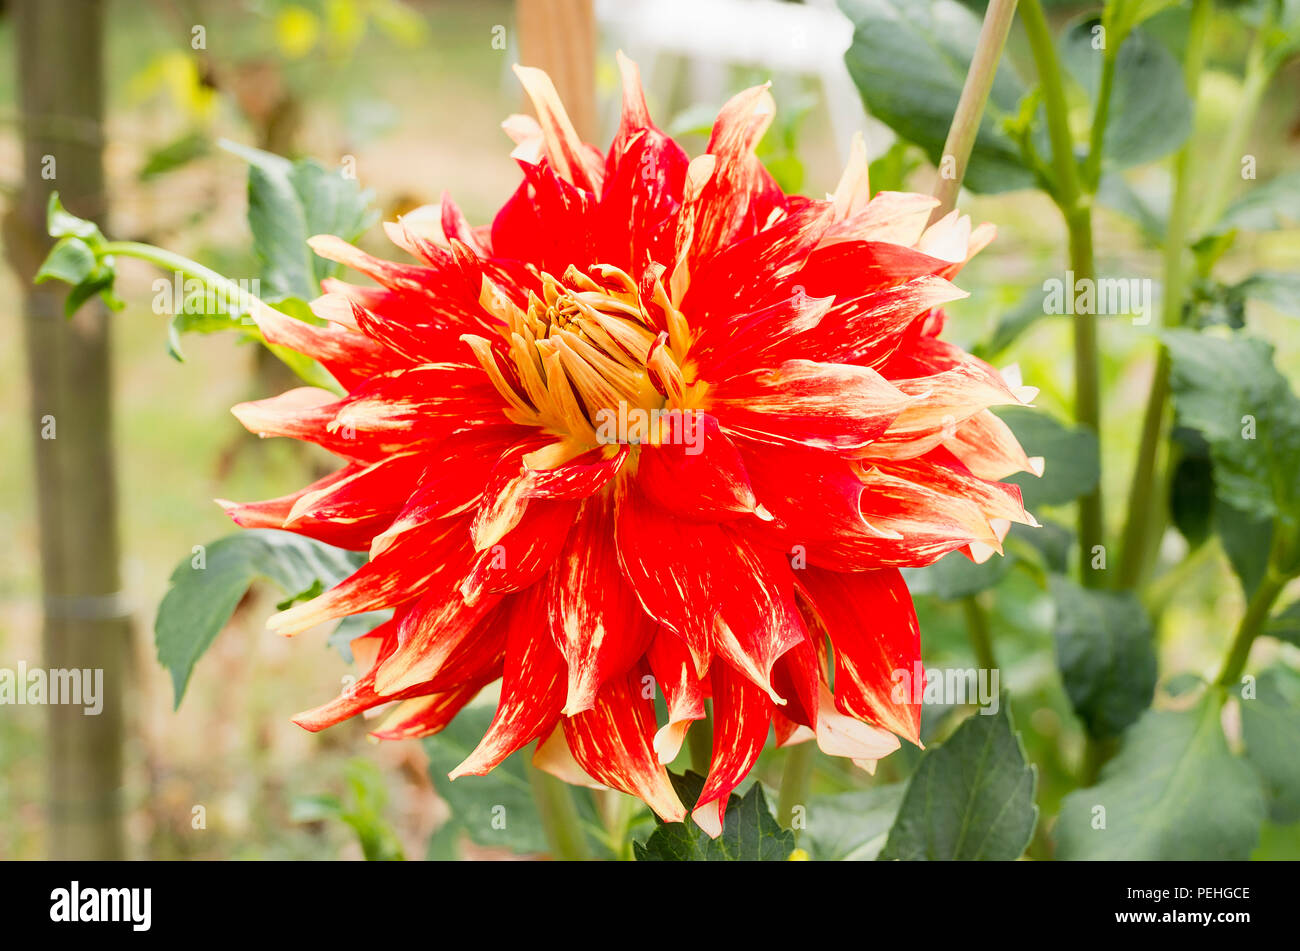 Dahlia Nick Sr is a large decorative cultivarwith a slight frilly twist to each petal Stock Photo